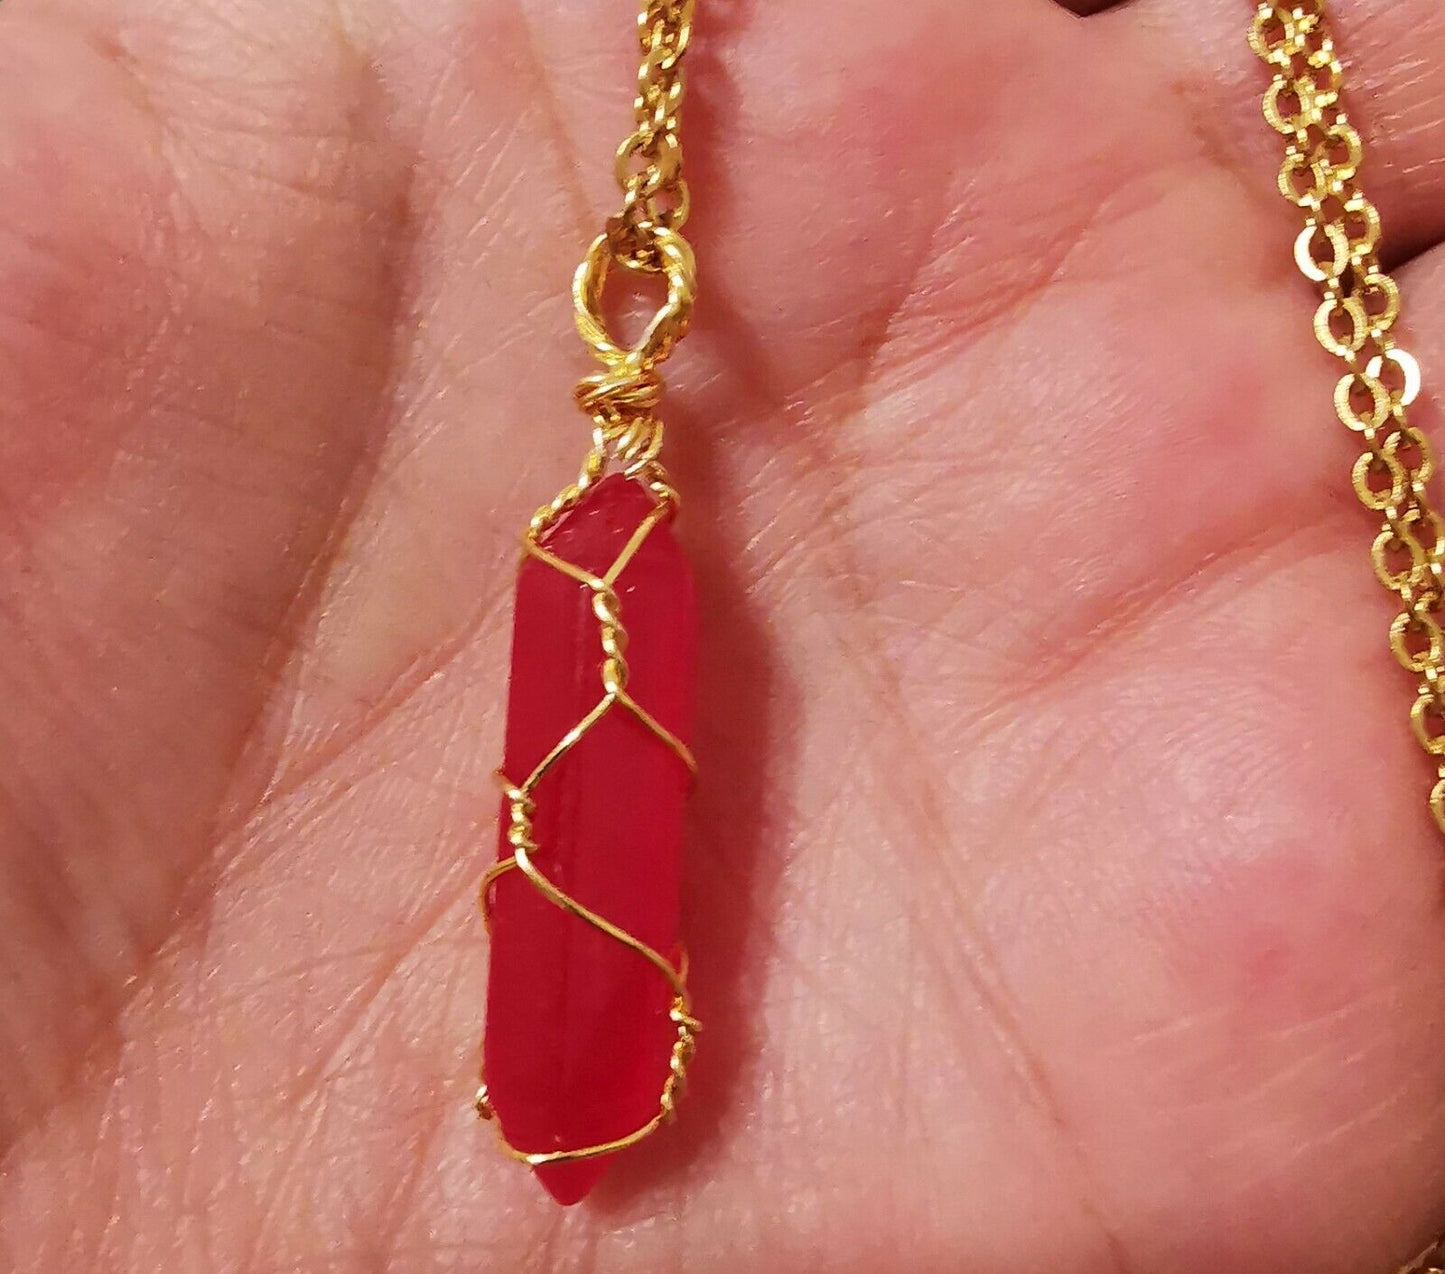 Quartz Crystal Pillar Point Healing Pendant Wire Wrapped Necklace-Gold Plated